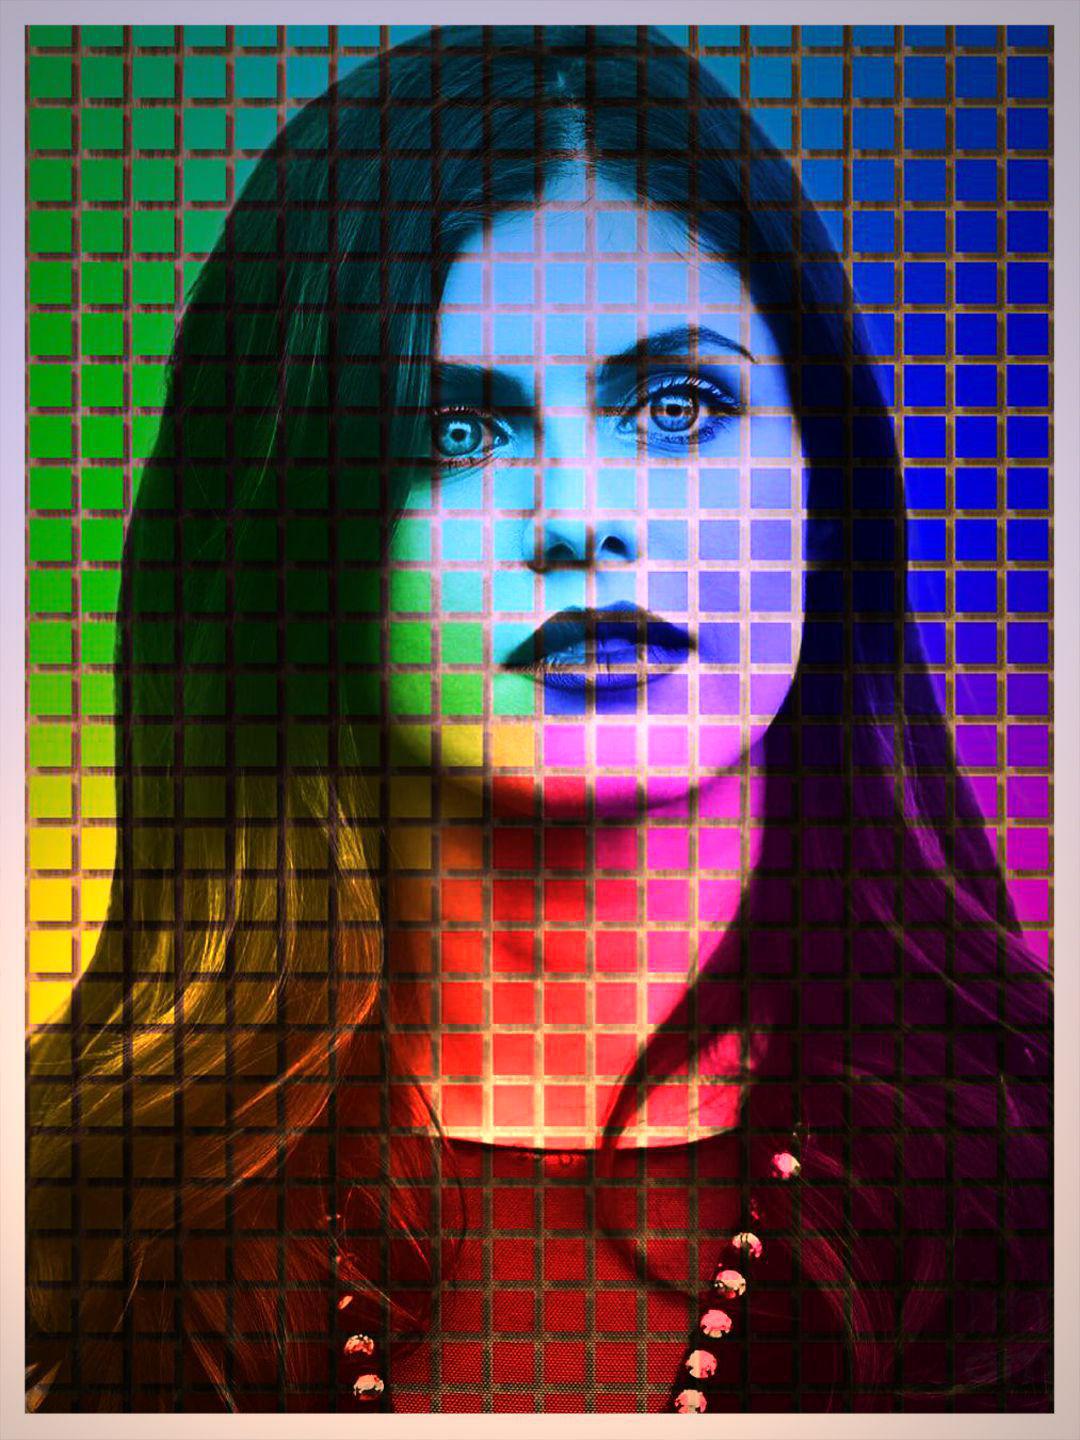 Alexandra Anna Daddario - Celeb ART - Beautiful Artworks of Celebrities,  Footballers, Politicians and Famous People in World | OpenSea